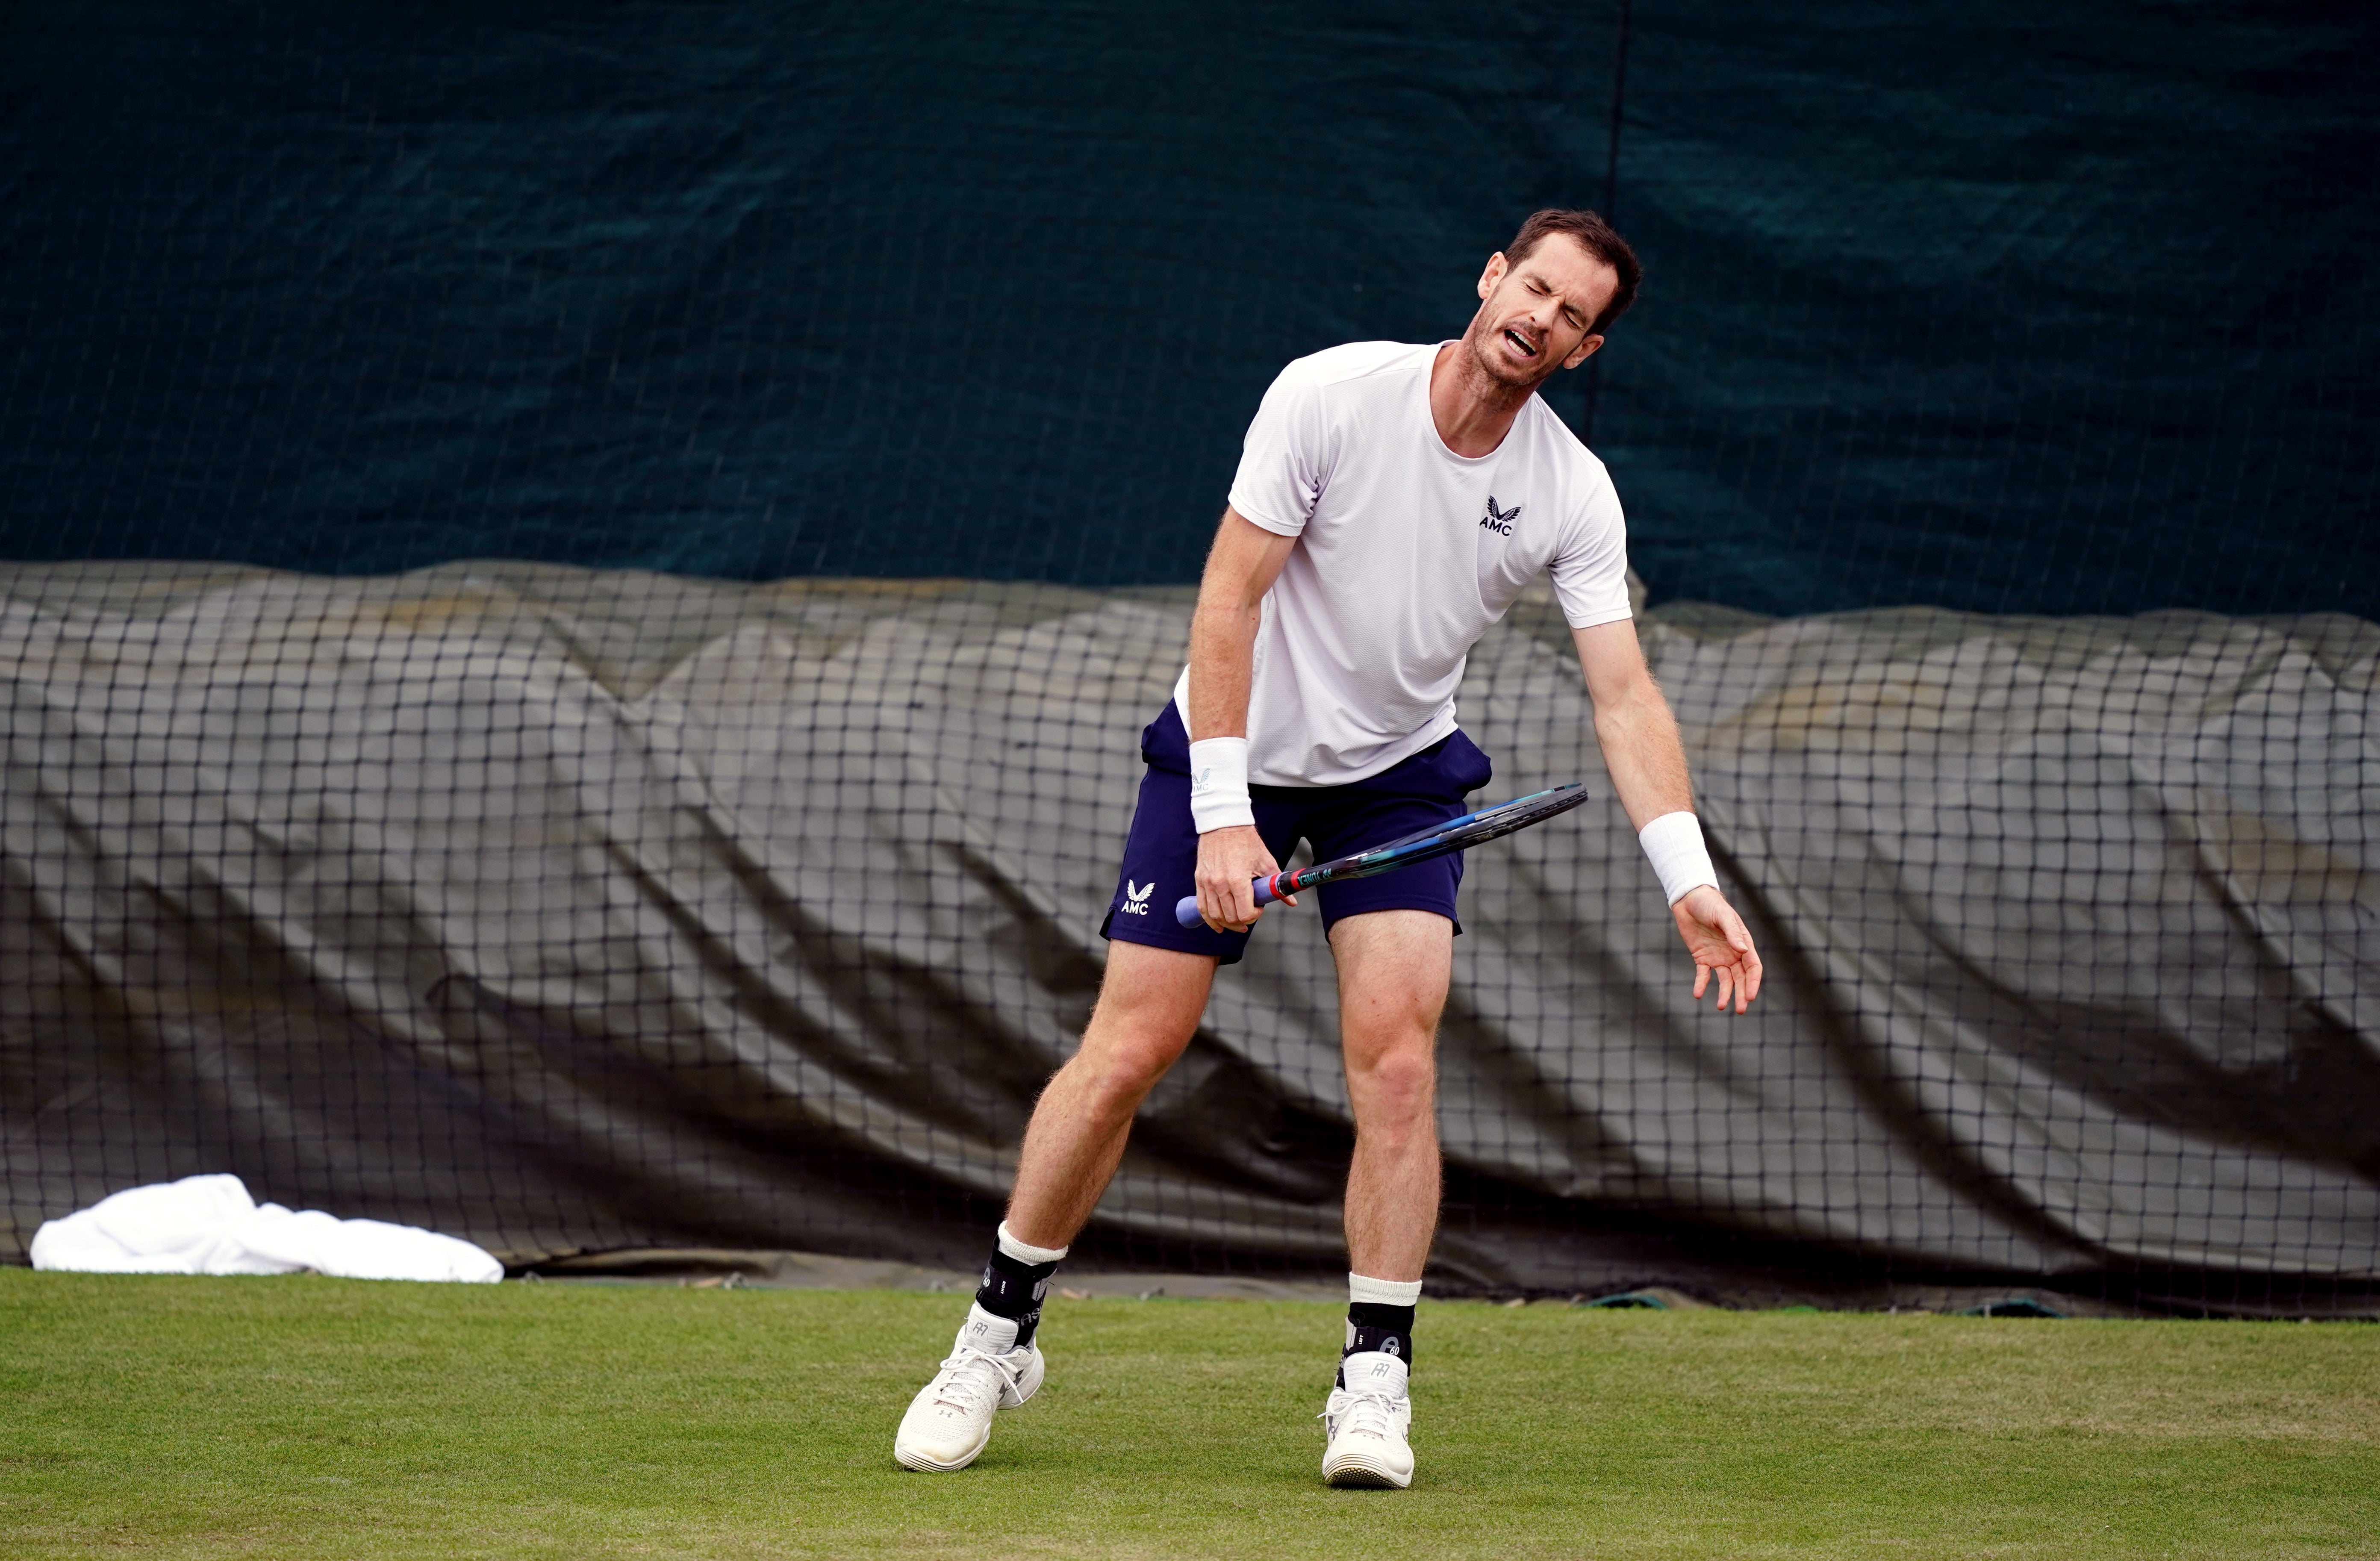 Two-time Wimbledon champion Andy Murray pulled out of the singles at the tournament at the last minute on Tuesday after struggling to recover from back surgery (Jordan Pettitt/PA)